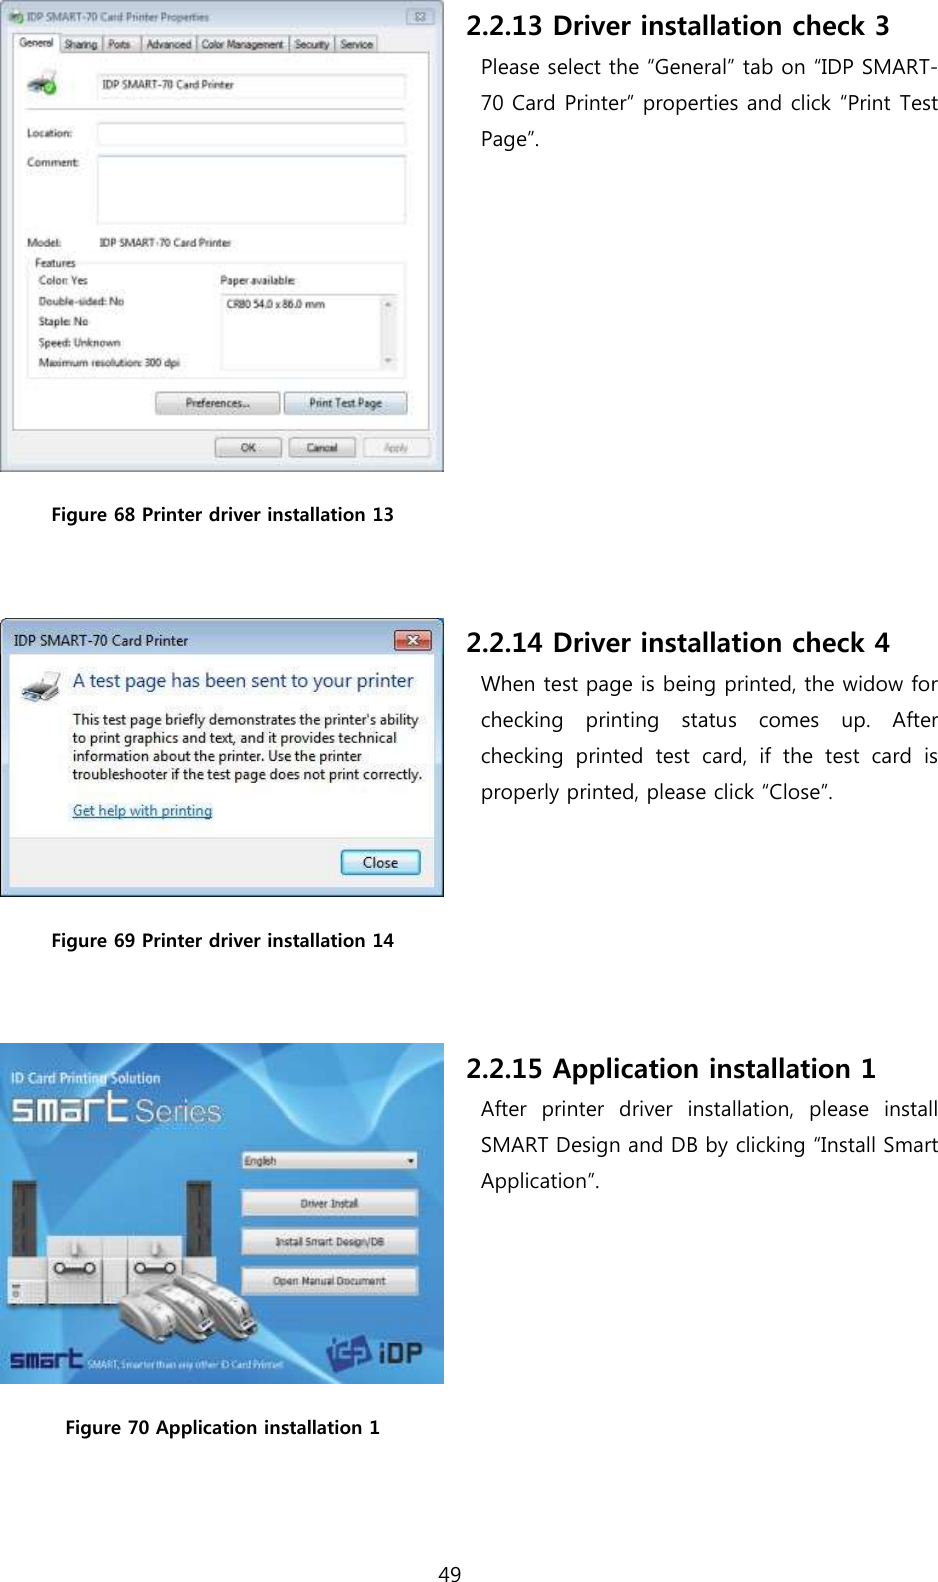 49   Figure 68 Printer driver installation 13  2.2.13 Driver installation check 3 Please select the “General” tab on “IDP SMART-70 Card Printer” properties and click “Print Test Page”.  Figure 69 Printer driver installation 14  2.2.14 Driver installation check 4 When test page is being printed, the widow for checking  printing  status  comes  up.  After checking  printed  test  card,  if  the  test  card  is properly printed, please click “Close”.  Figure 70 Application installation 1 2.2.15 Application installation 1 After  printer  driver  installation,  please  install SMART Design and DB by clicking “Install Smart Application”. 